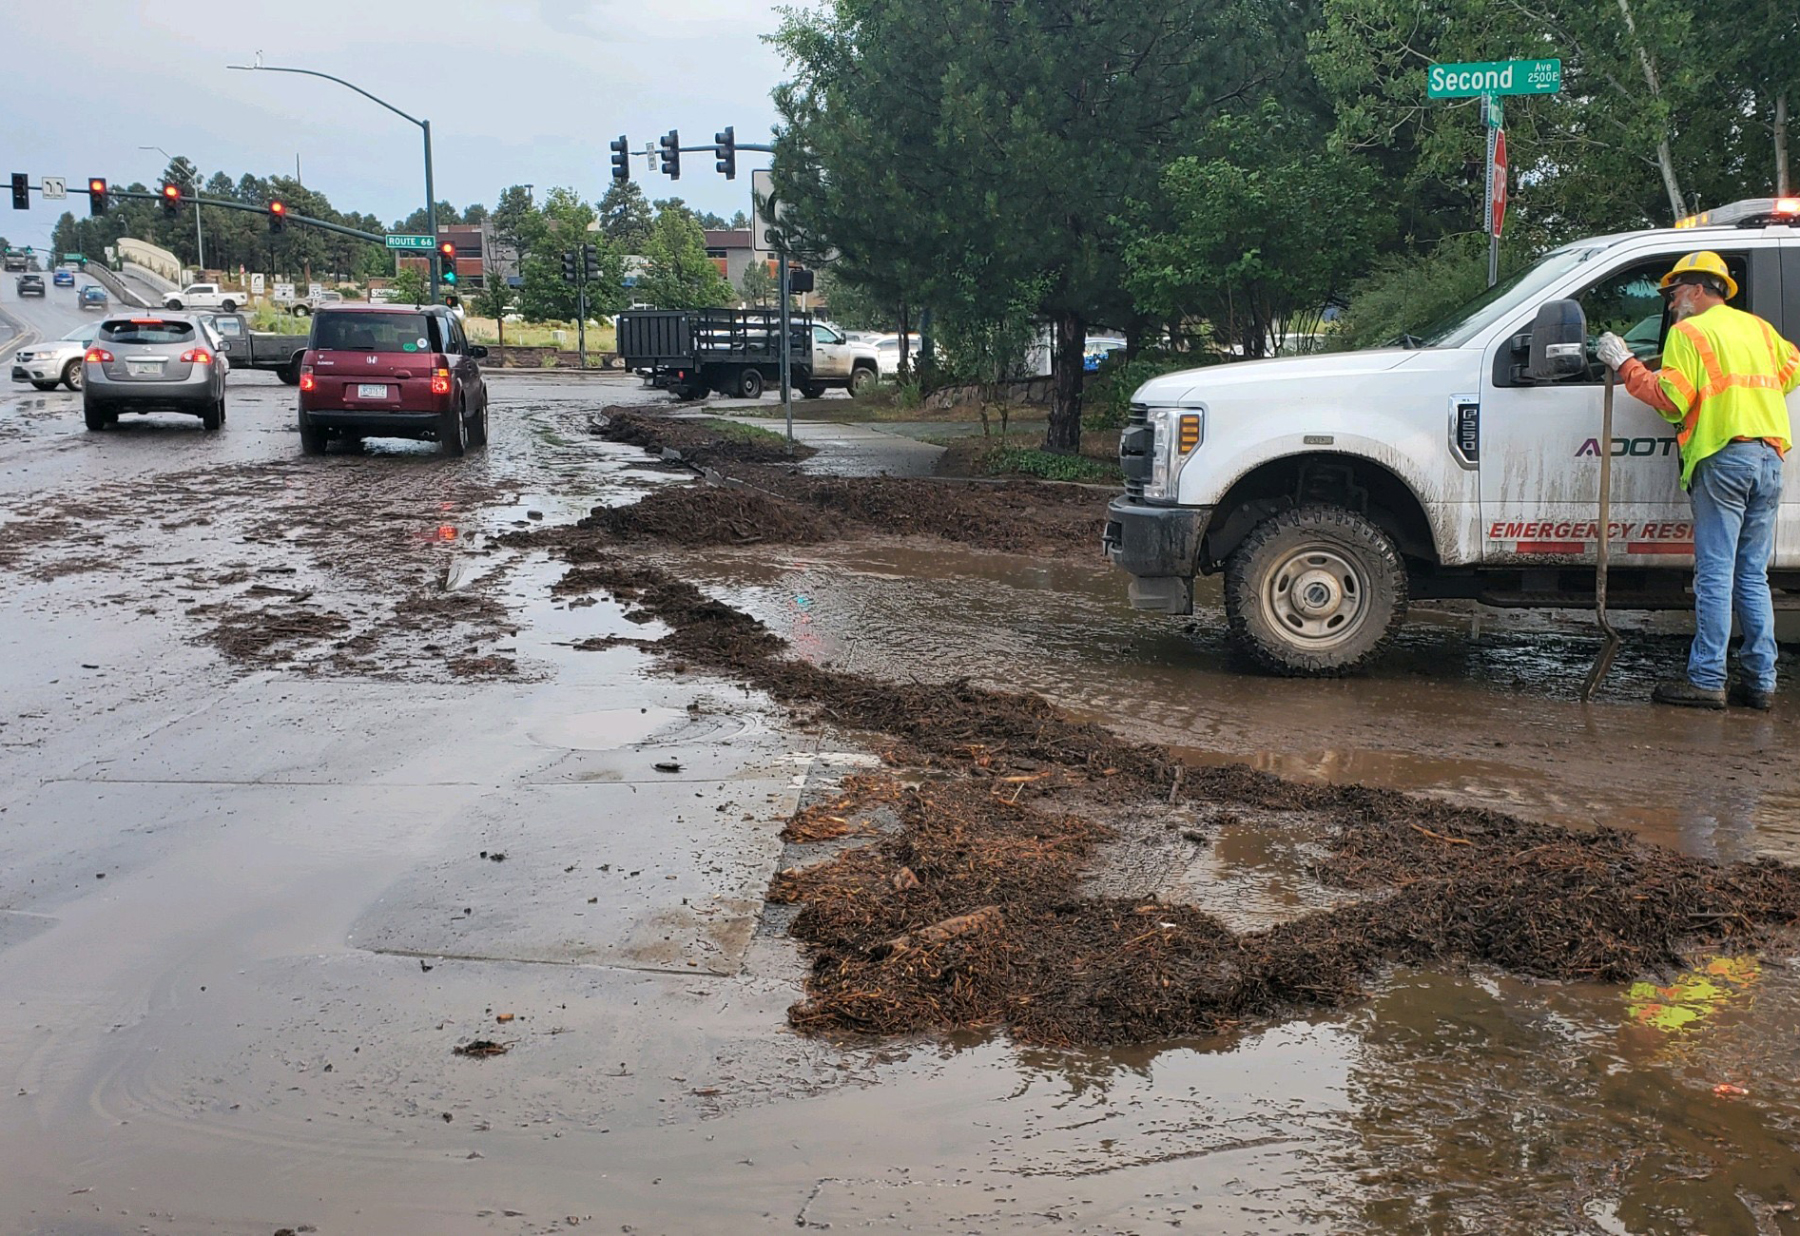 Shelter in place order issued for flood areas of Flagstaff Williams